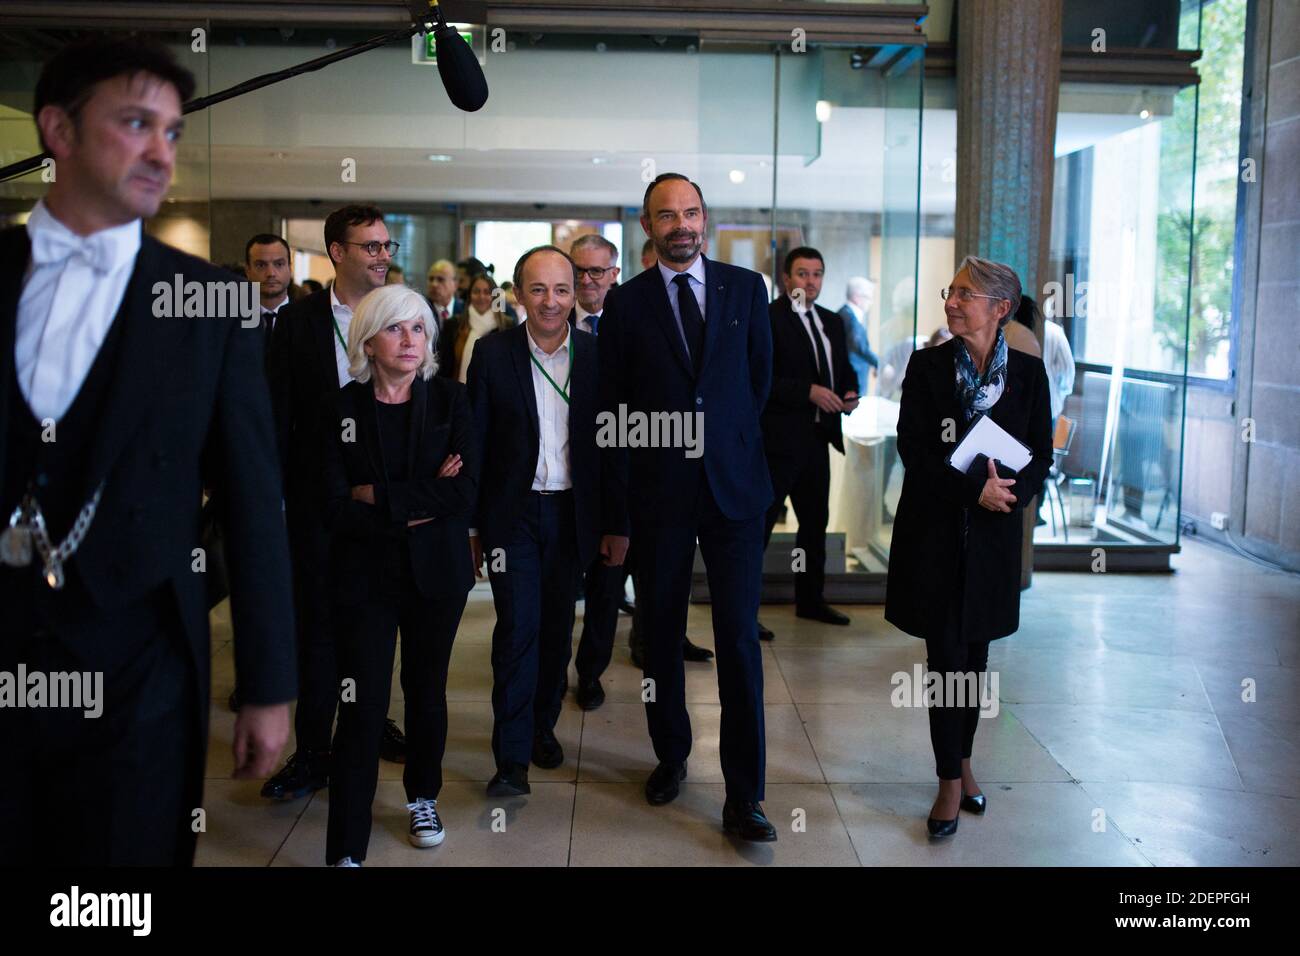 Fench Prime Minister Edouard Philippe, Economist Laurence Tubiana, French Minister for the Ecological and Inclusive Transition Elisabeth Borne and Thierry Pech arrive at the Citizens' Convention for Climate held at the French Conseil economique, social et environnemental (CESE - Economic, Social and Environmental Council) in Paris, 04 October 2019 Photo by Raphaël Lafargue/ABACAPRESS.COM Stock Photo